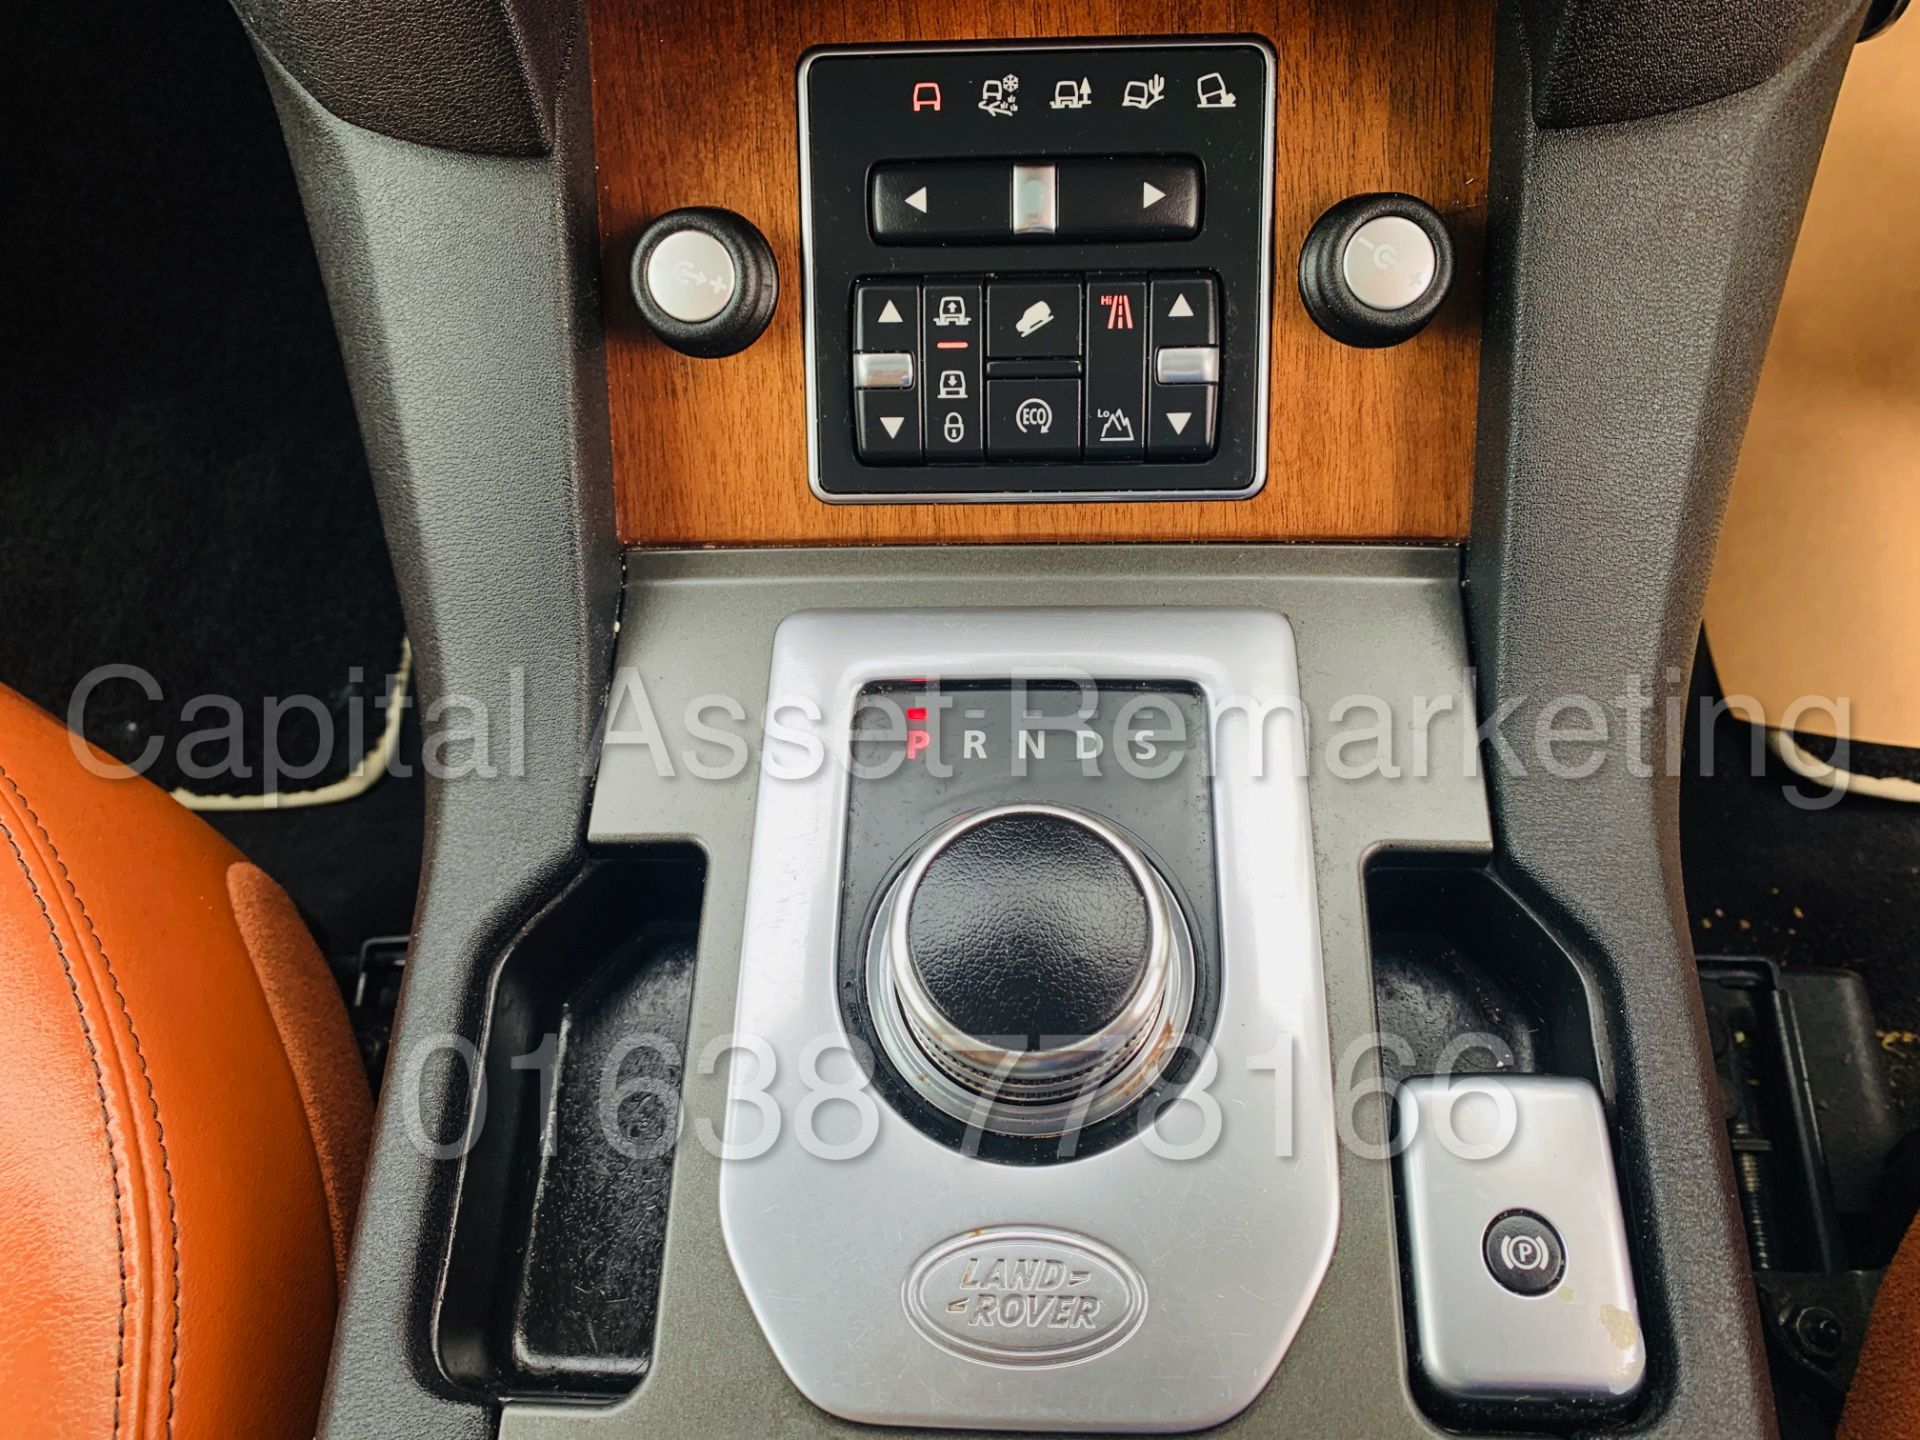 (On Sale) LAND ROVER DISCOVERY 4 *LANDMARK* 7 SEATER SUV (2016) '3.0 SDV6 - 8 SPEED AUTO' (1 OWNER) - Image 60 of 65